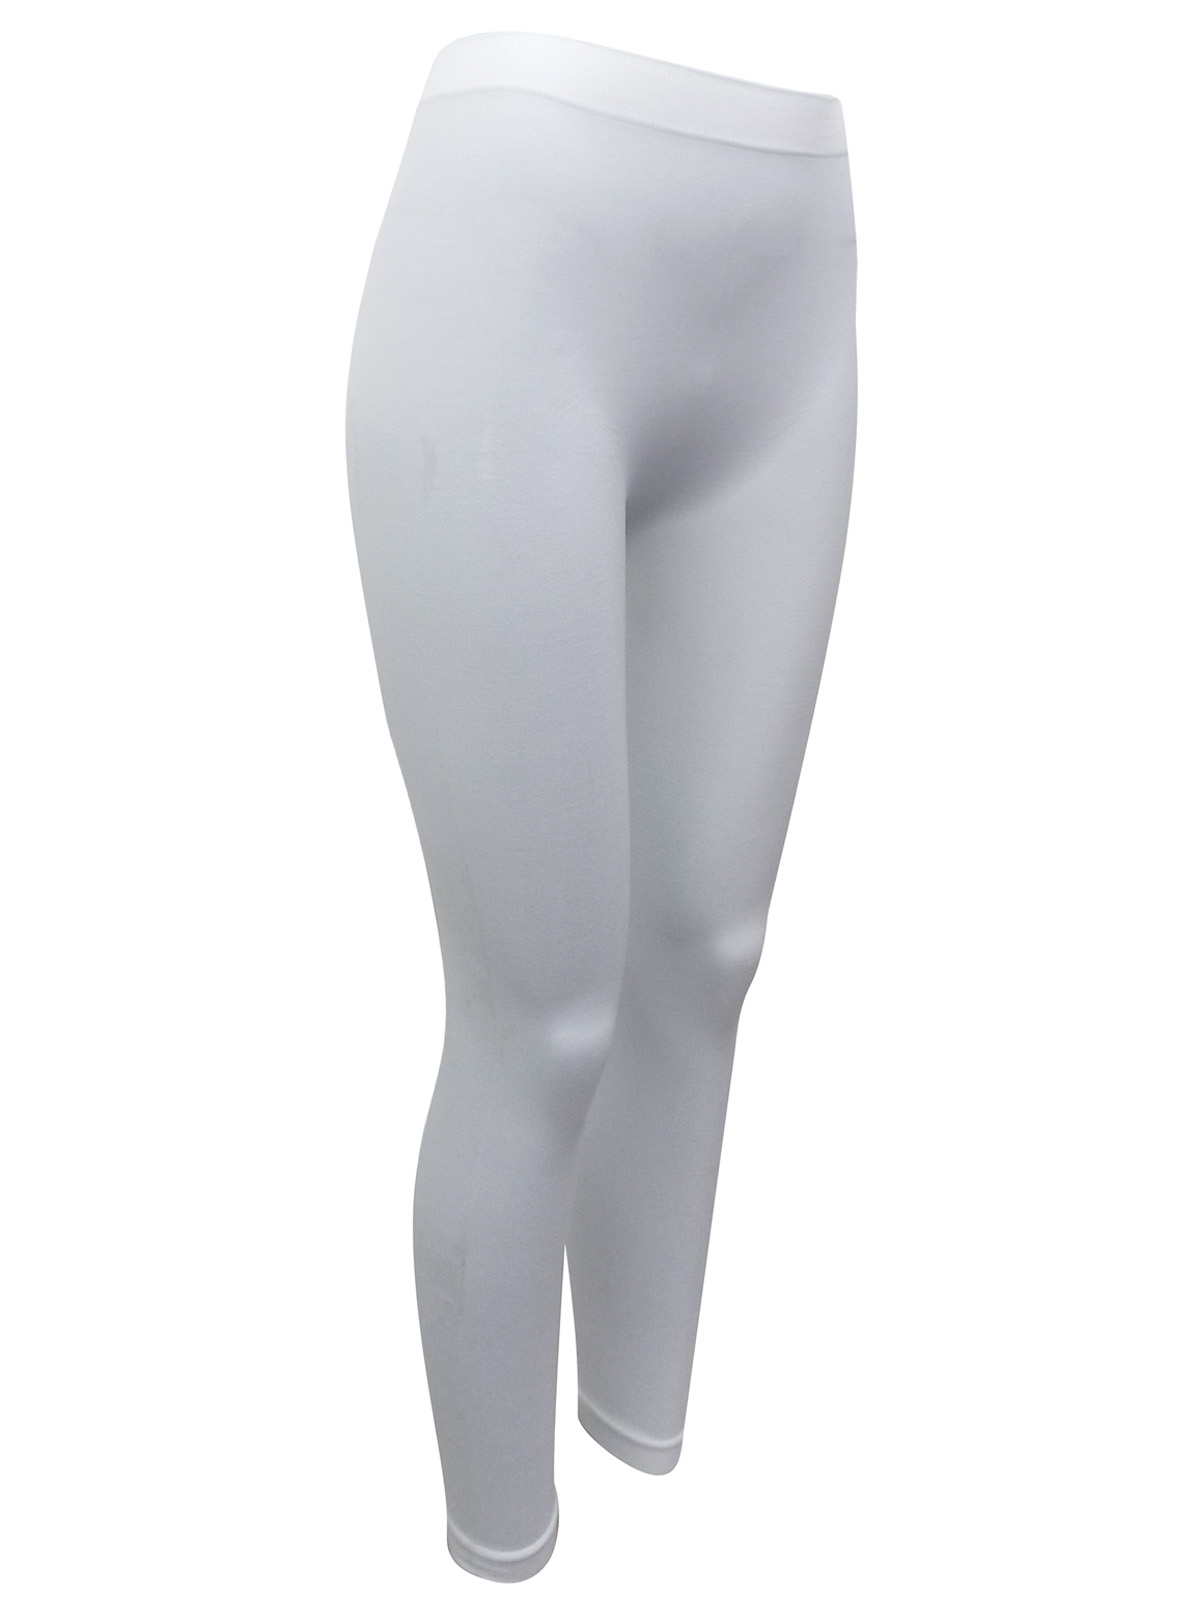 Ever & Ever - - Ever & Ever WHITE Full Length Seamless Leggings - Size S/M to L/XL